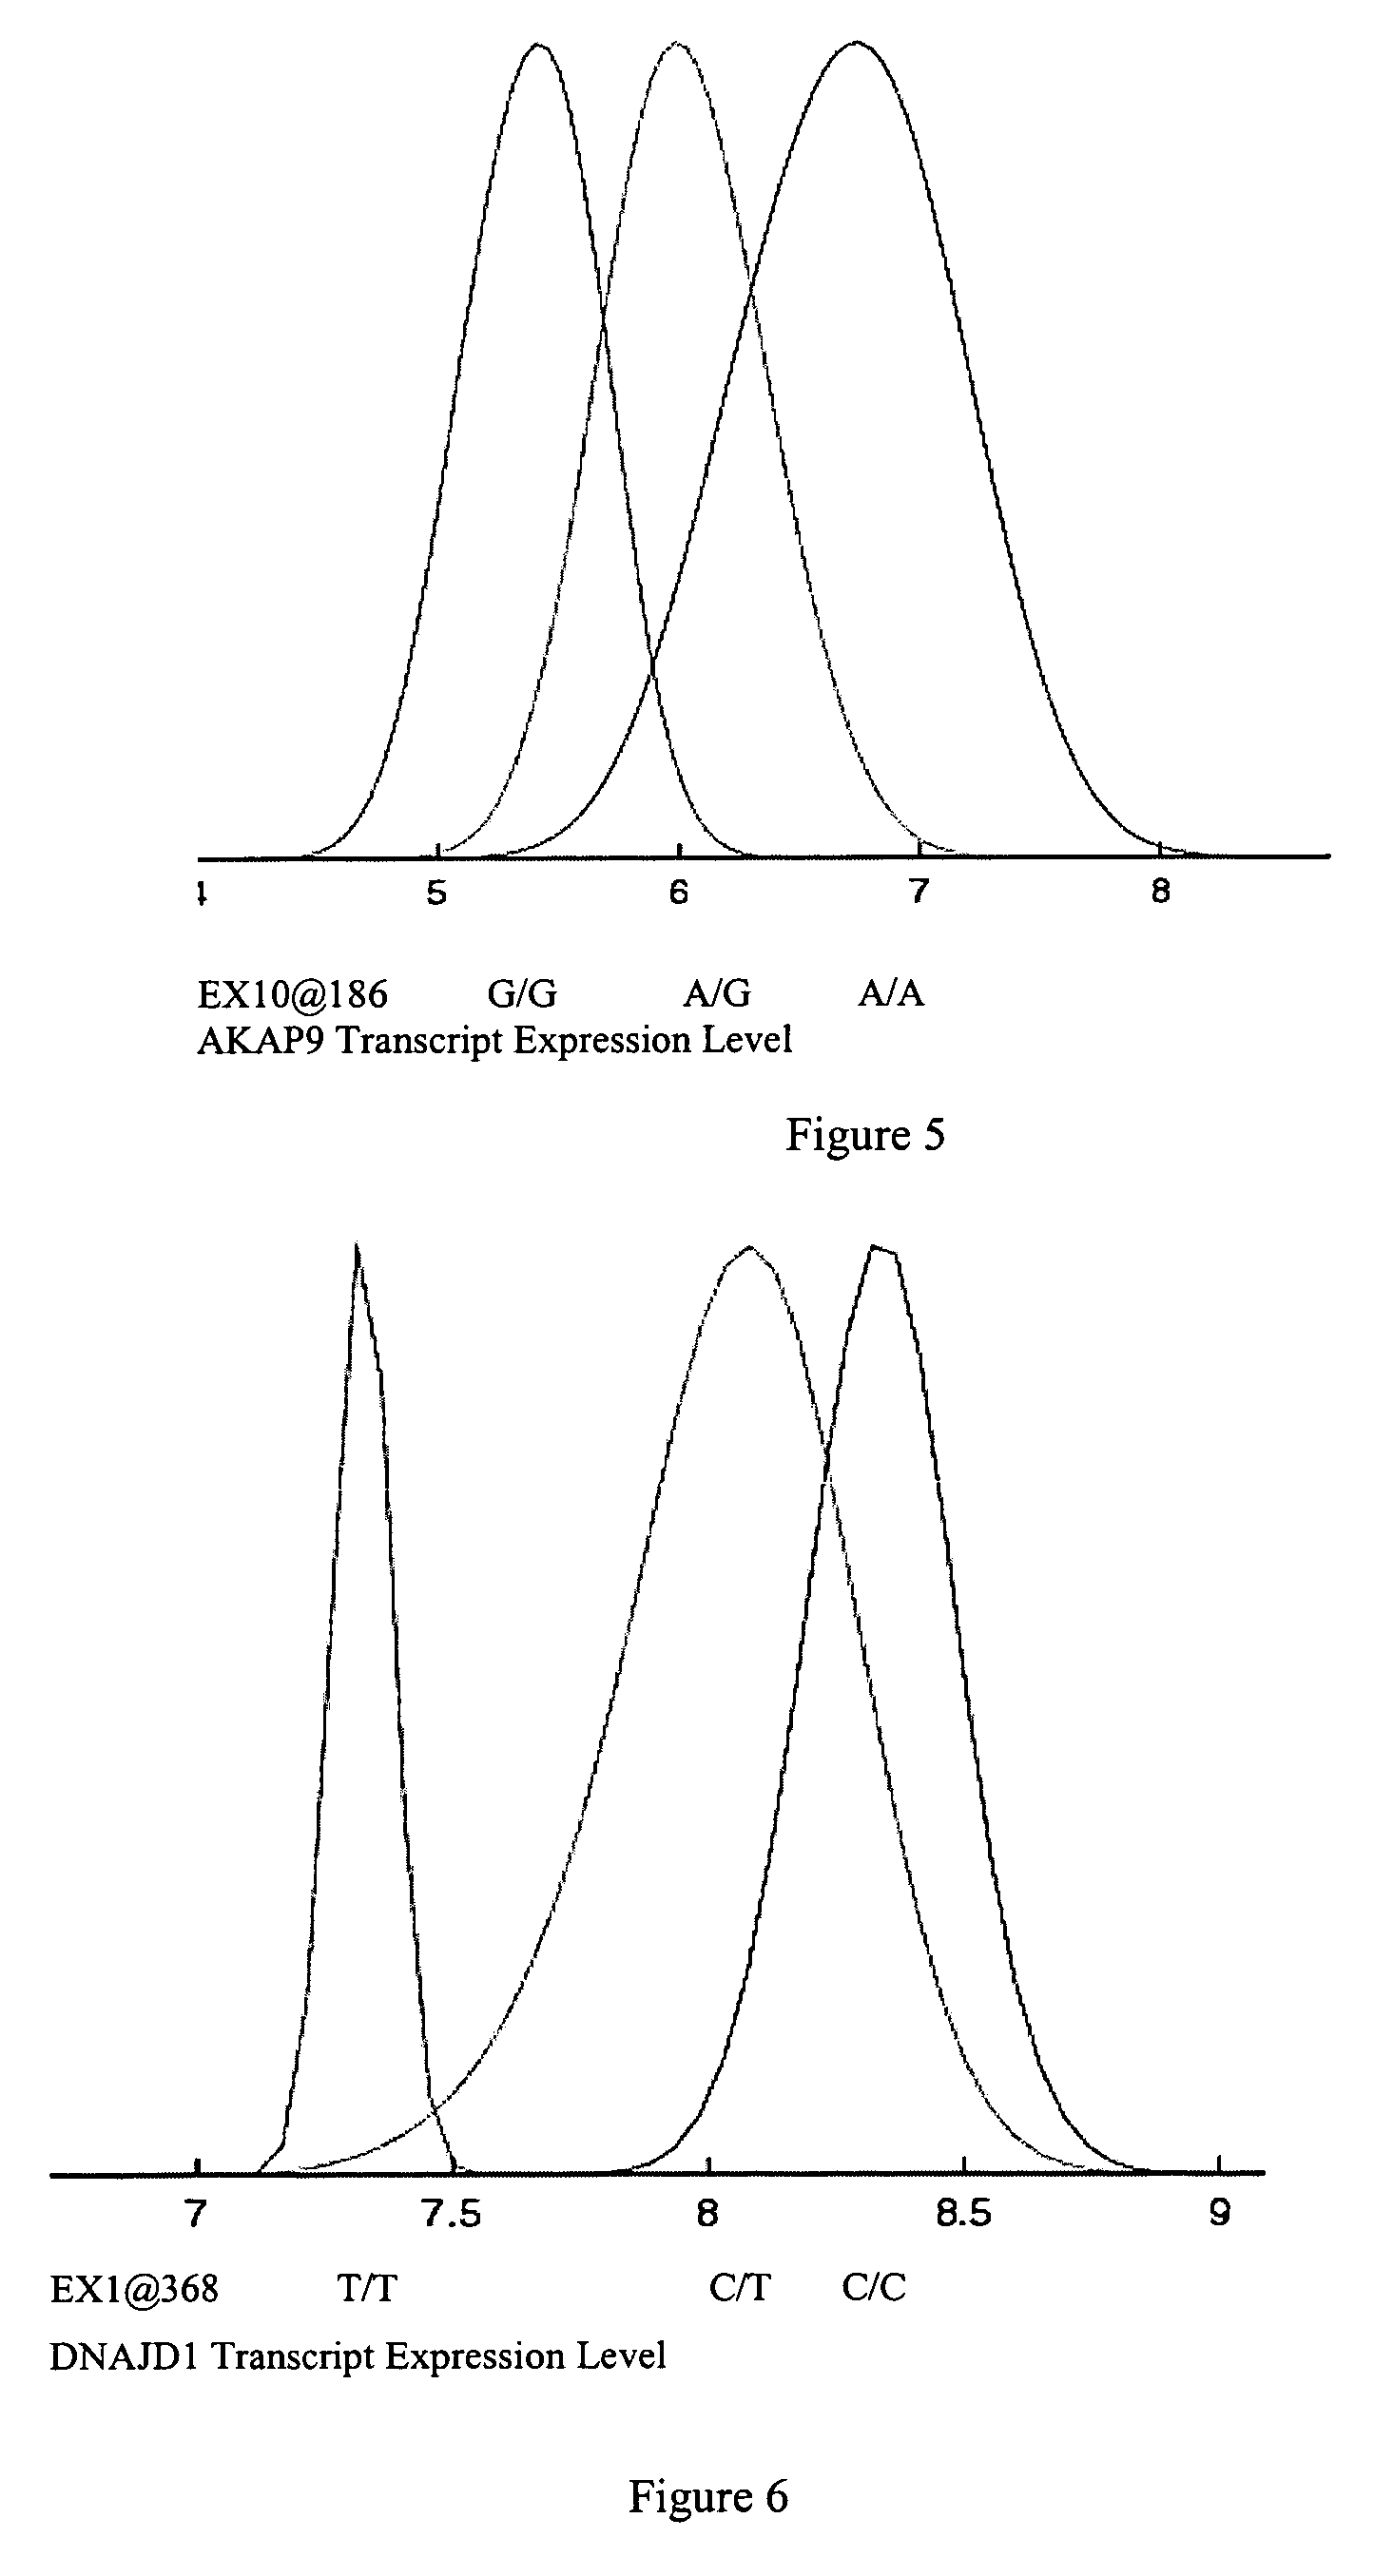 Gene variants and use thereof